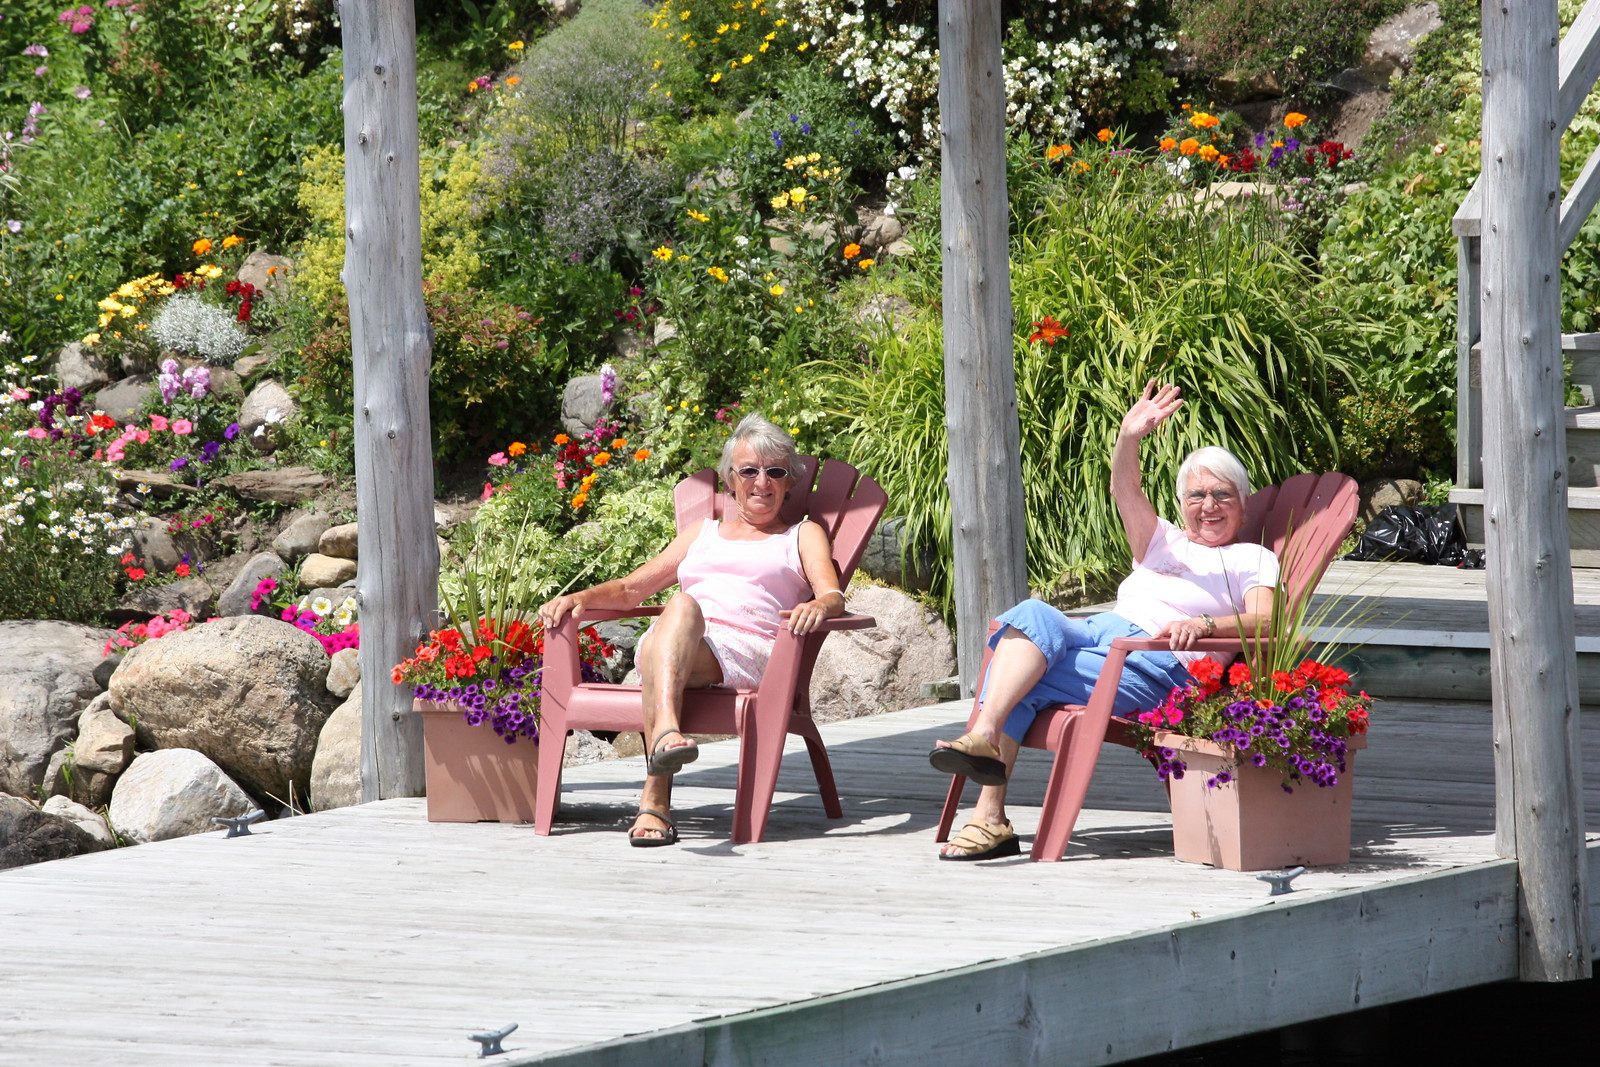 Cornwall named one of Canada’s top retirement destinations